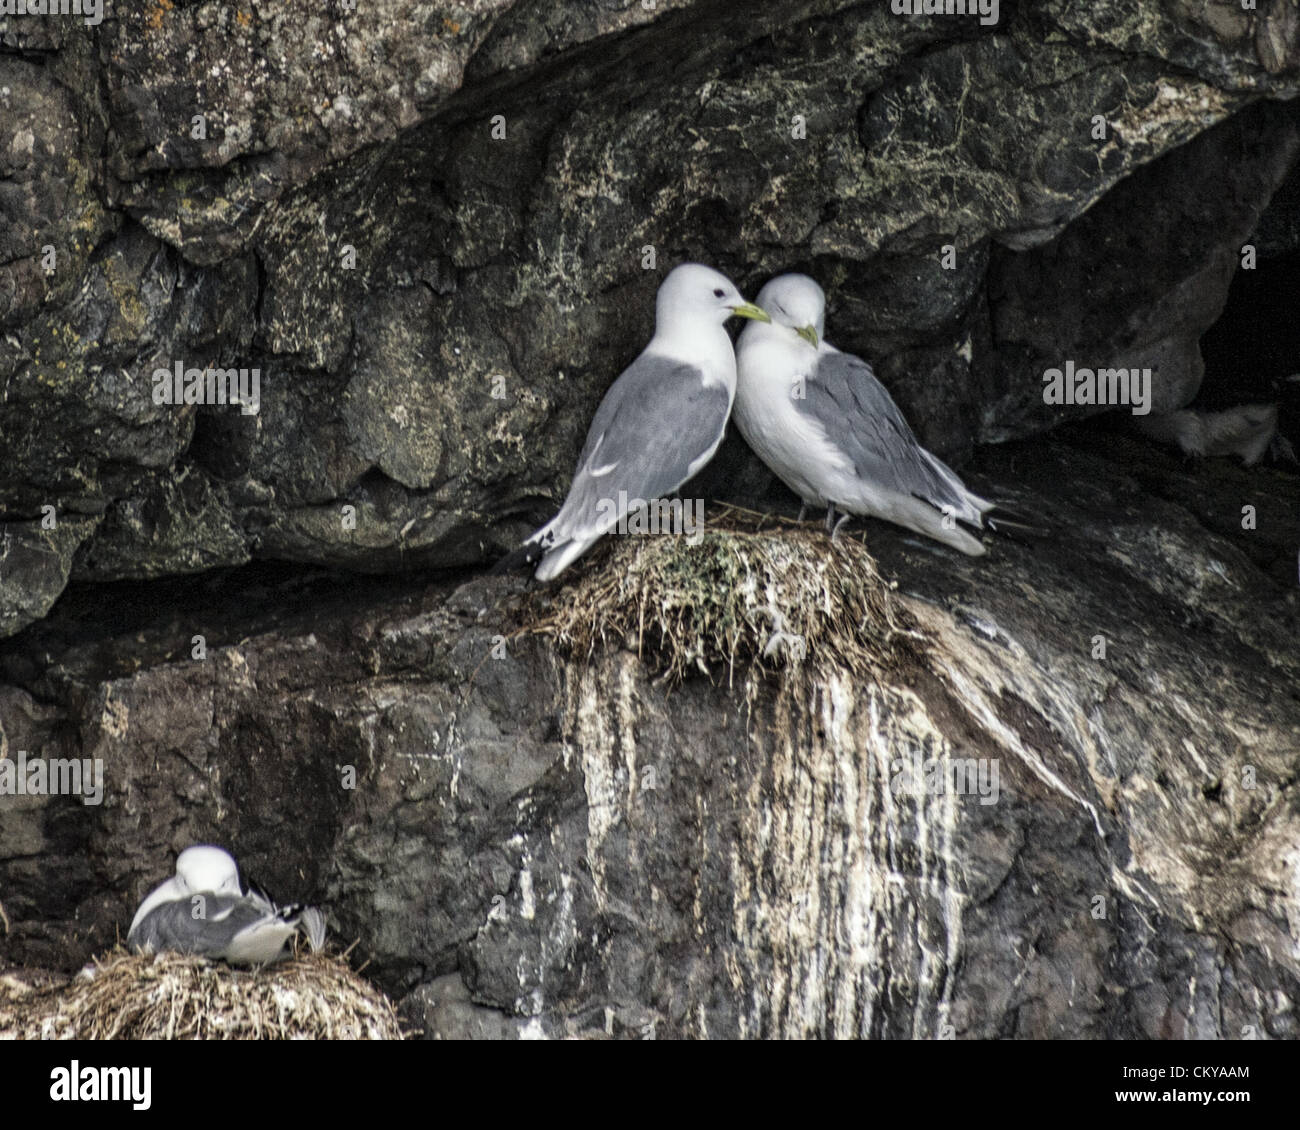 July 1, 2012 - Alaska, US - A pair of nesting Black-legged Kittiwakes [Rissa tridactyla], a seabird species in the gull family, make the granitic islands and cliffs of Kenai Fjords National Park their home. Established in 1980, the National Park covers 1,760 square miles of the Kenai Peninsula. (Credit Image: © Arnold Drapkin/ZUMAPRESS.com) Stock Photo